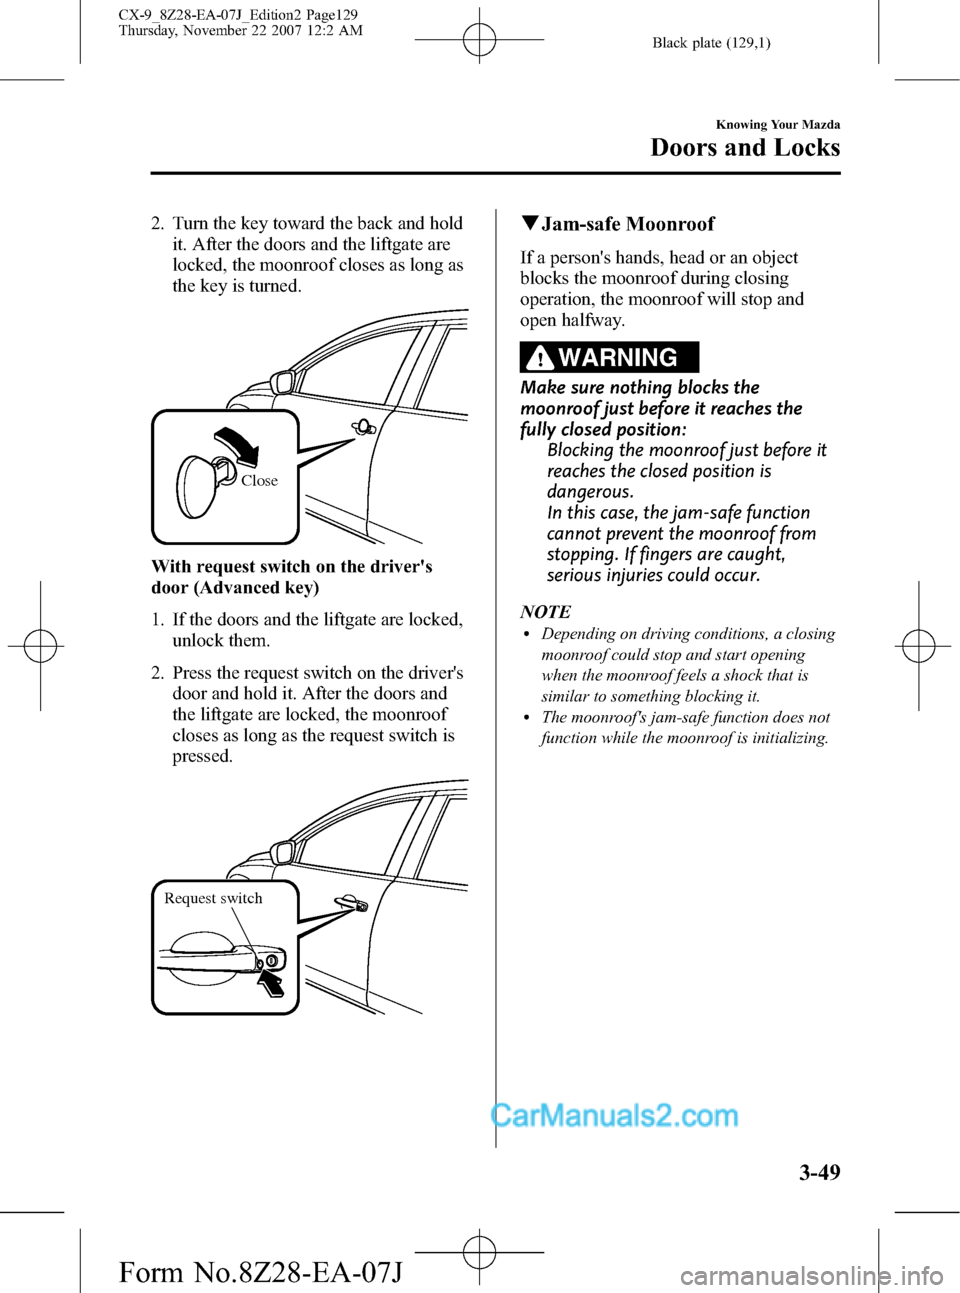 MAZDA MODEL CX-9 2008  Owners Manual (in English) Black plate (129,1)
2. Turn the key toward the back and hold
it. After the doors and the liftgate are
locked, the moonroof closes as long as
the key is turned.
Close
With request switch on the driver